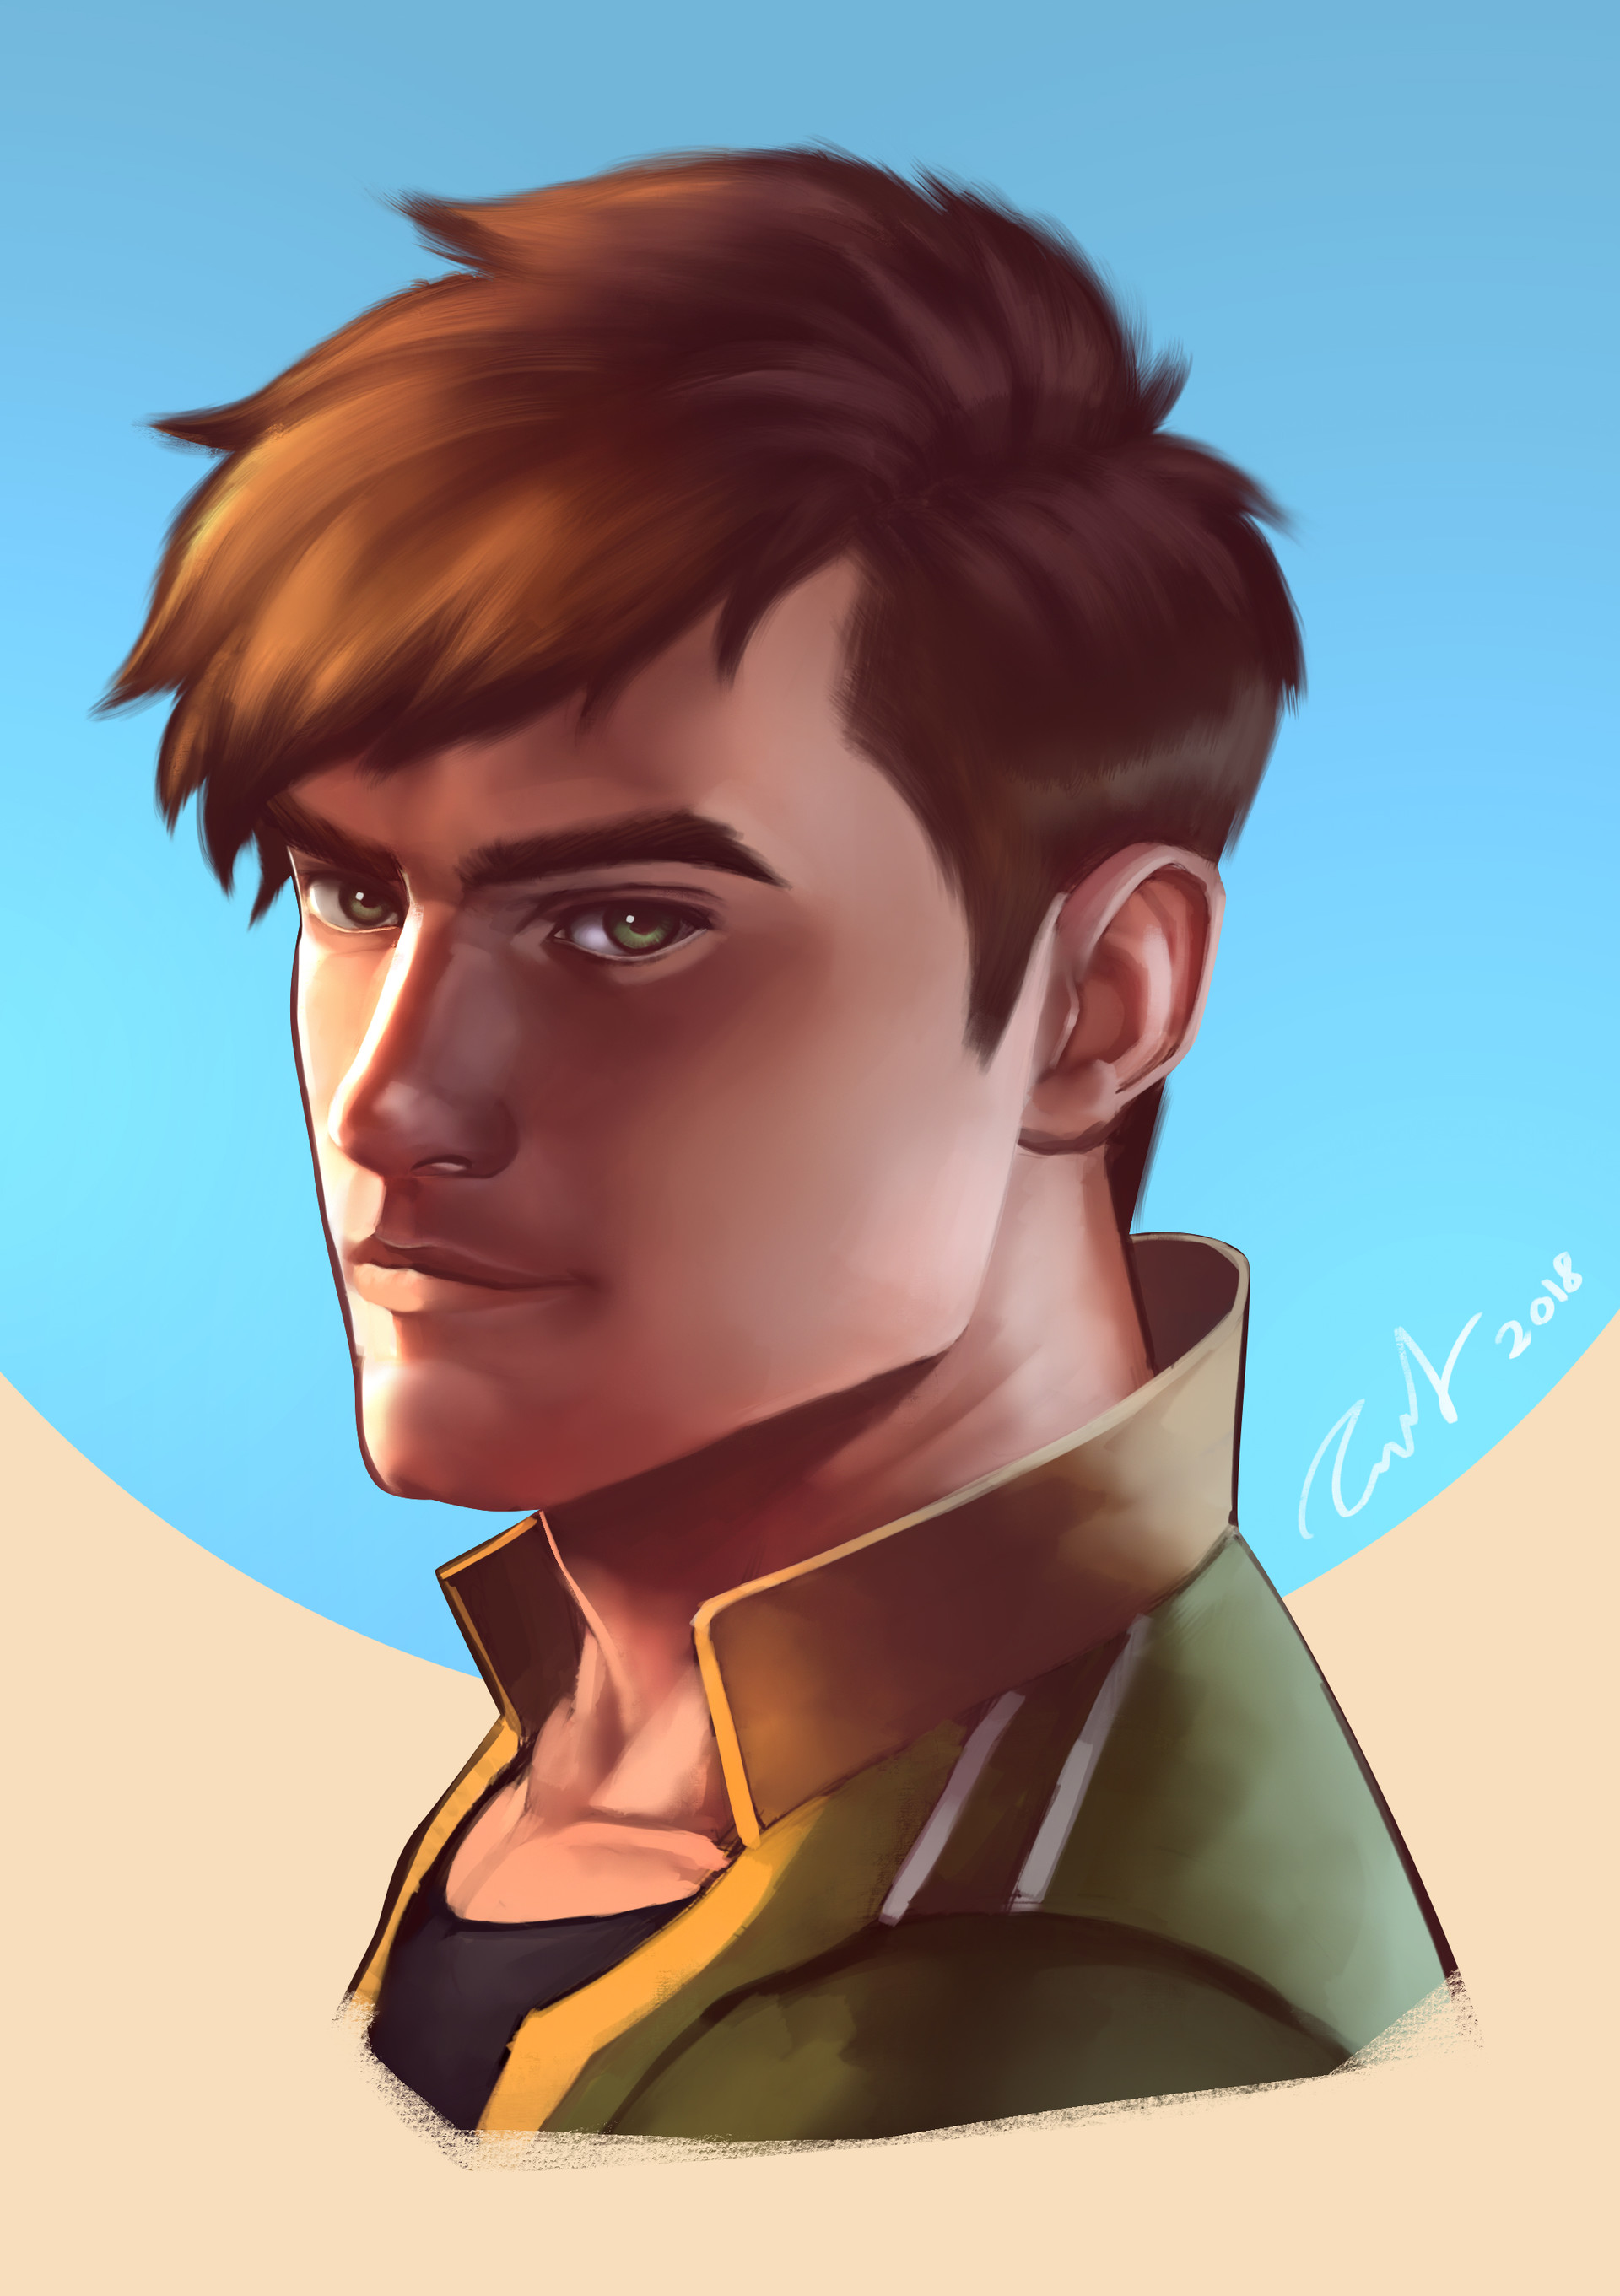 Another portrait painting, this time with Alex from Stardew Valley. 